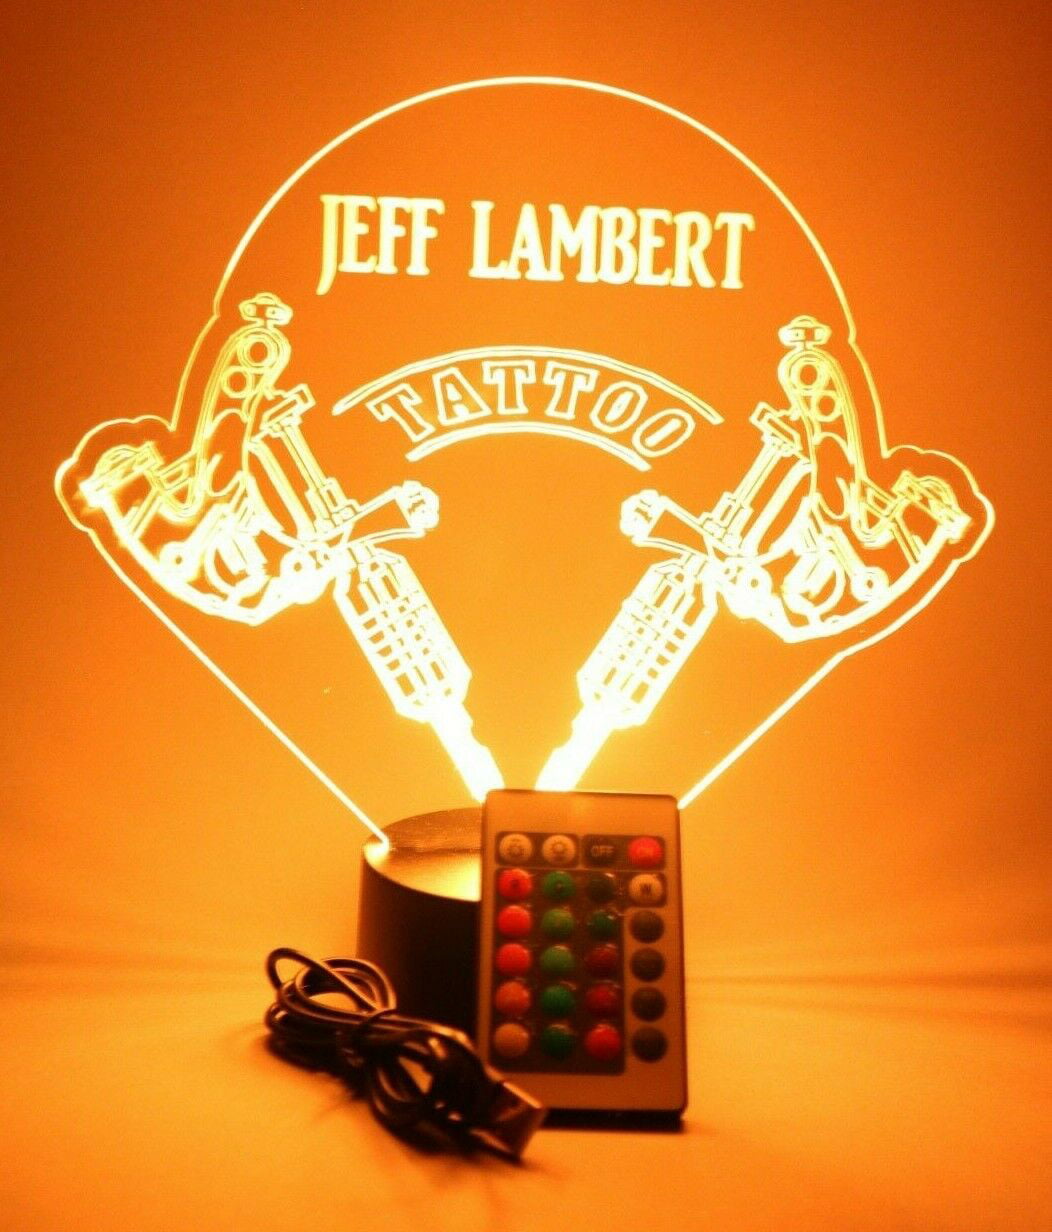 Personalized Name Tattoo Shop LED Night Light Lamp with Tattoo Artist Gift